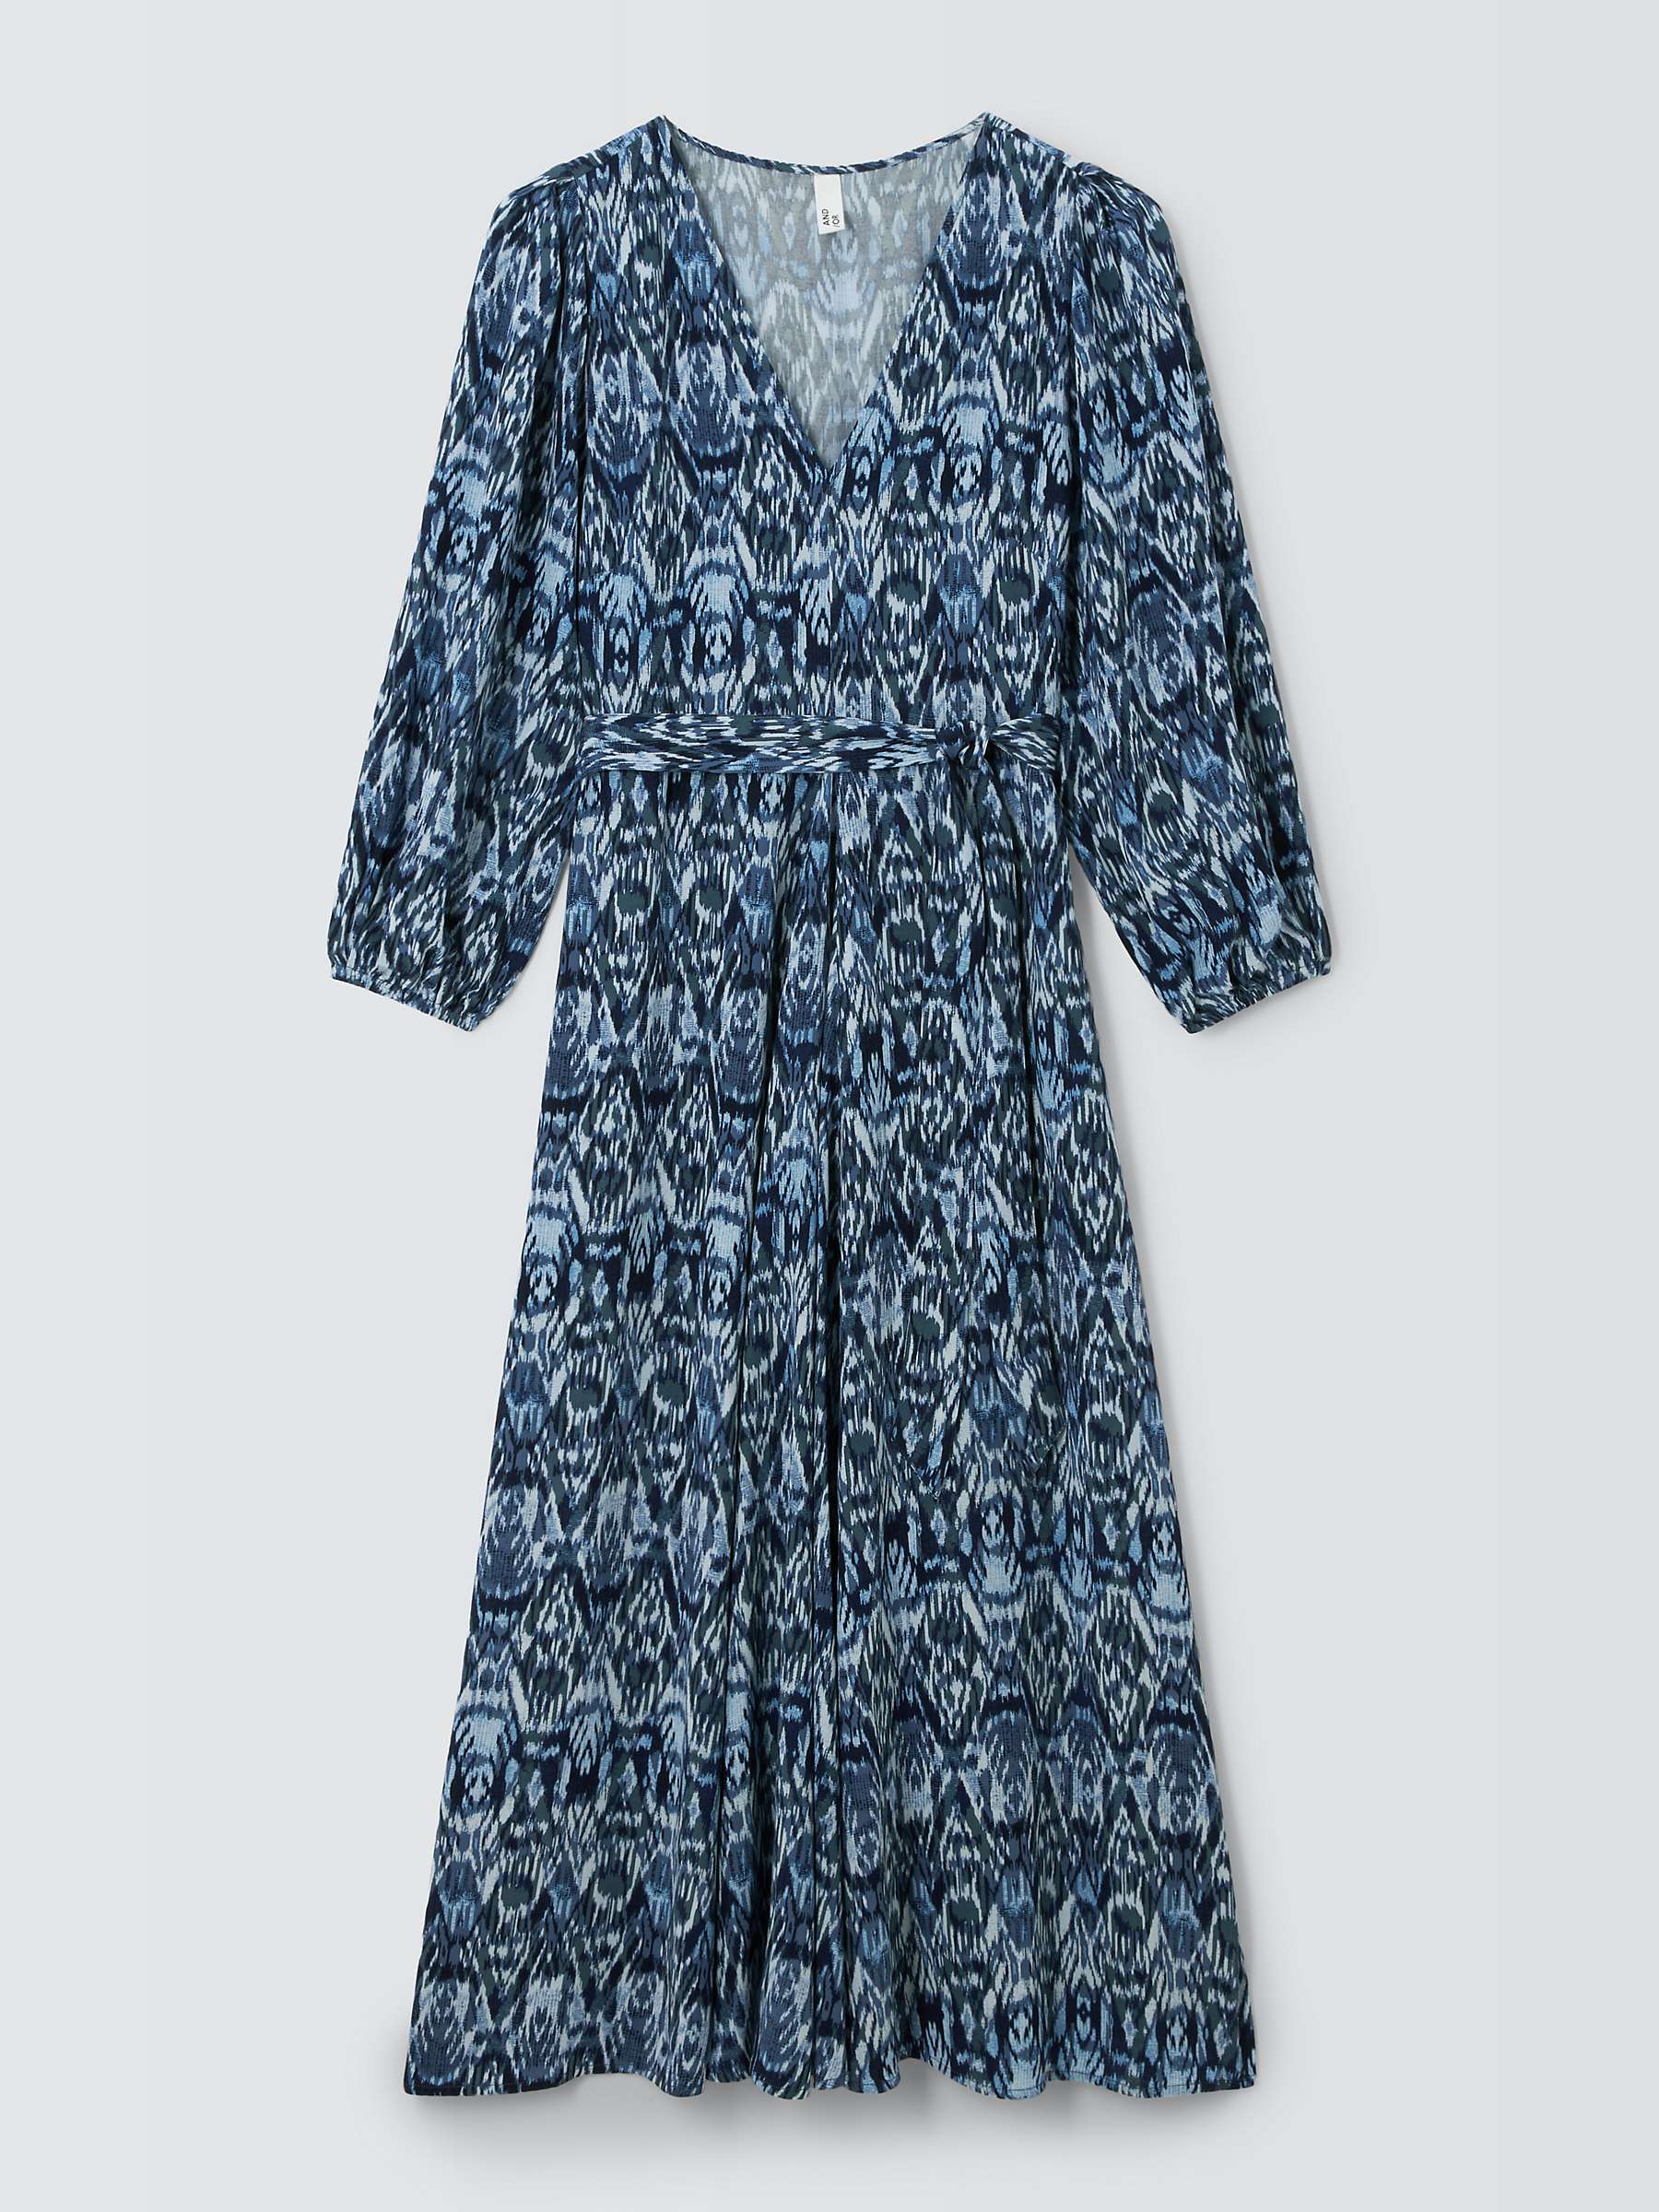 Buy AND/OR Layla Ikat Midi Dress, Blue Online at johnlewis.com